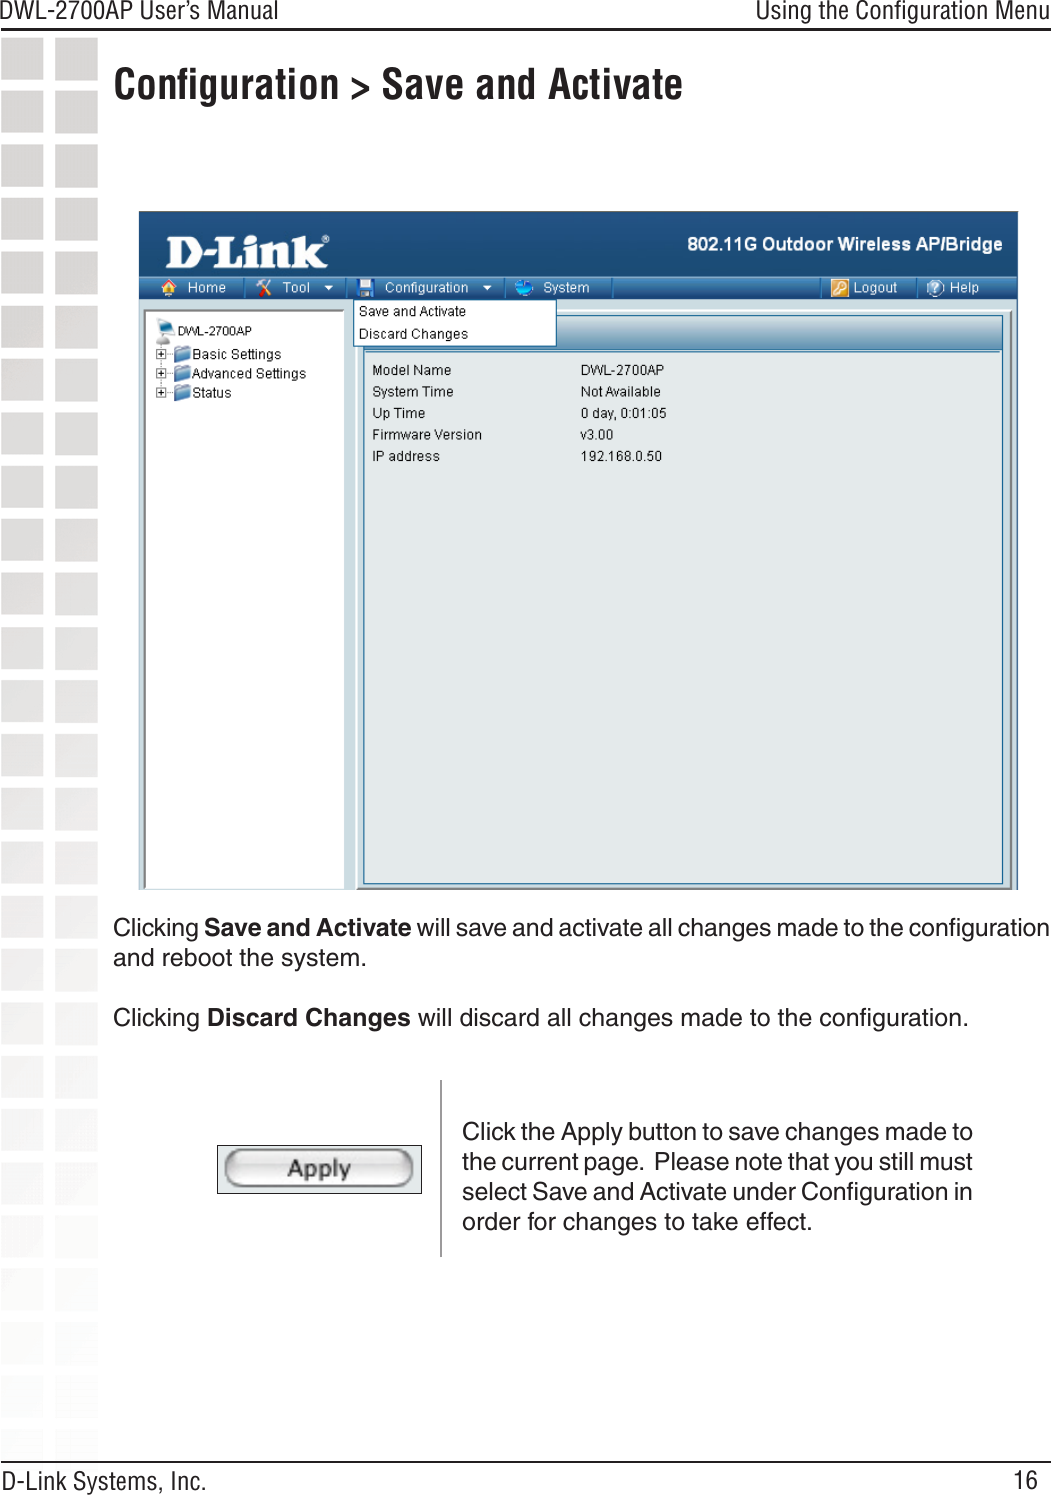 16DWL-2700AP User’s Manual D-Link Systems, Inc.Using the Conﬁguration MenuClicking Save and Activate will save and activate all changes made to the conﬁguration and reboot the system.Clicking Discard Changes will discard all changes made to the conﬁguration.Conﬁguration &gt; Save and ActivateClick the Apply button to save changes made to the current page.  Please note that you still must select Save and Activate under Conﬁguration in order for changes to take effect.